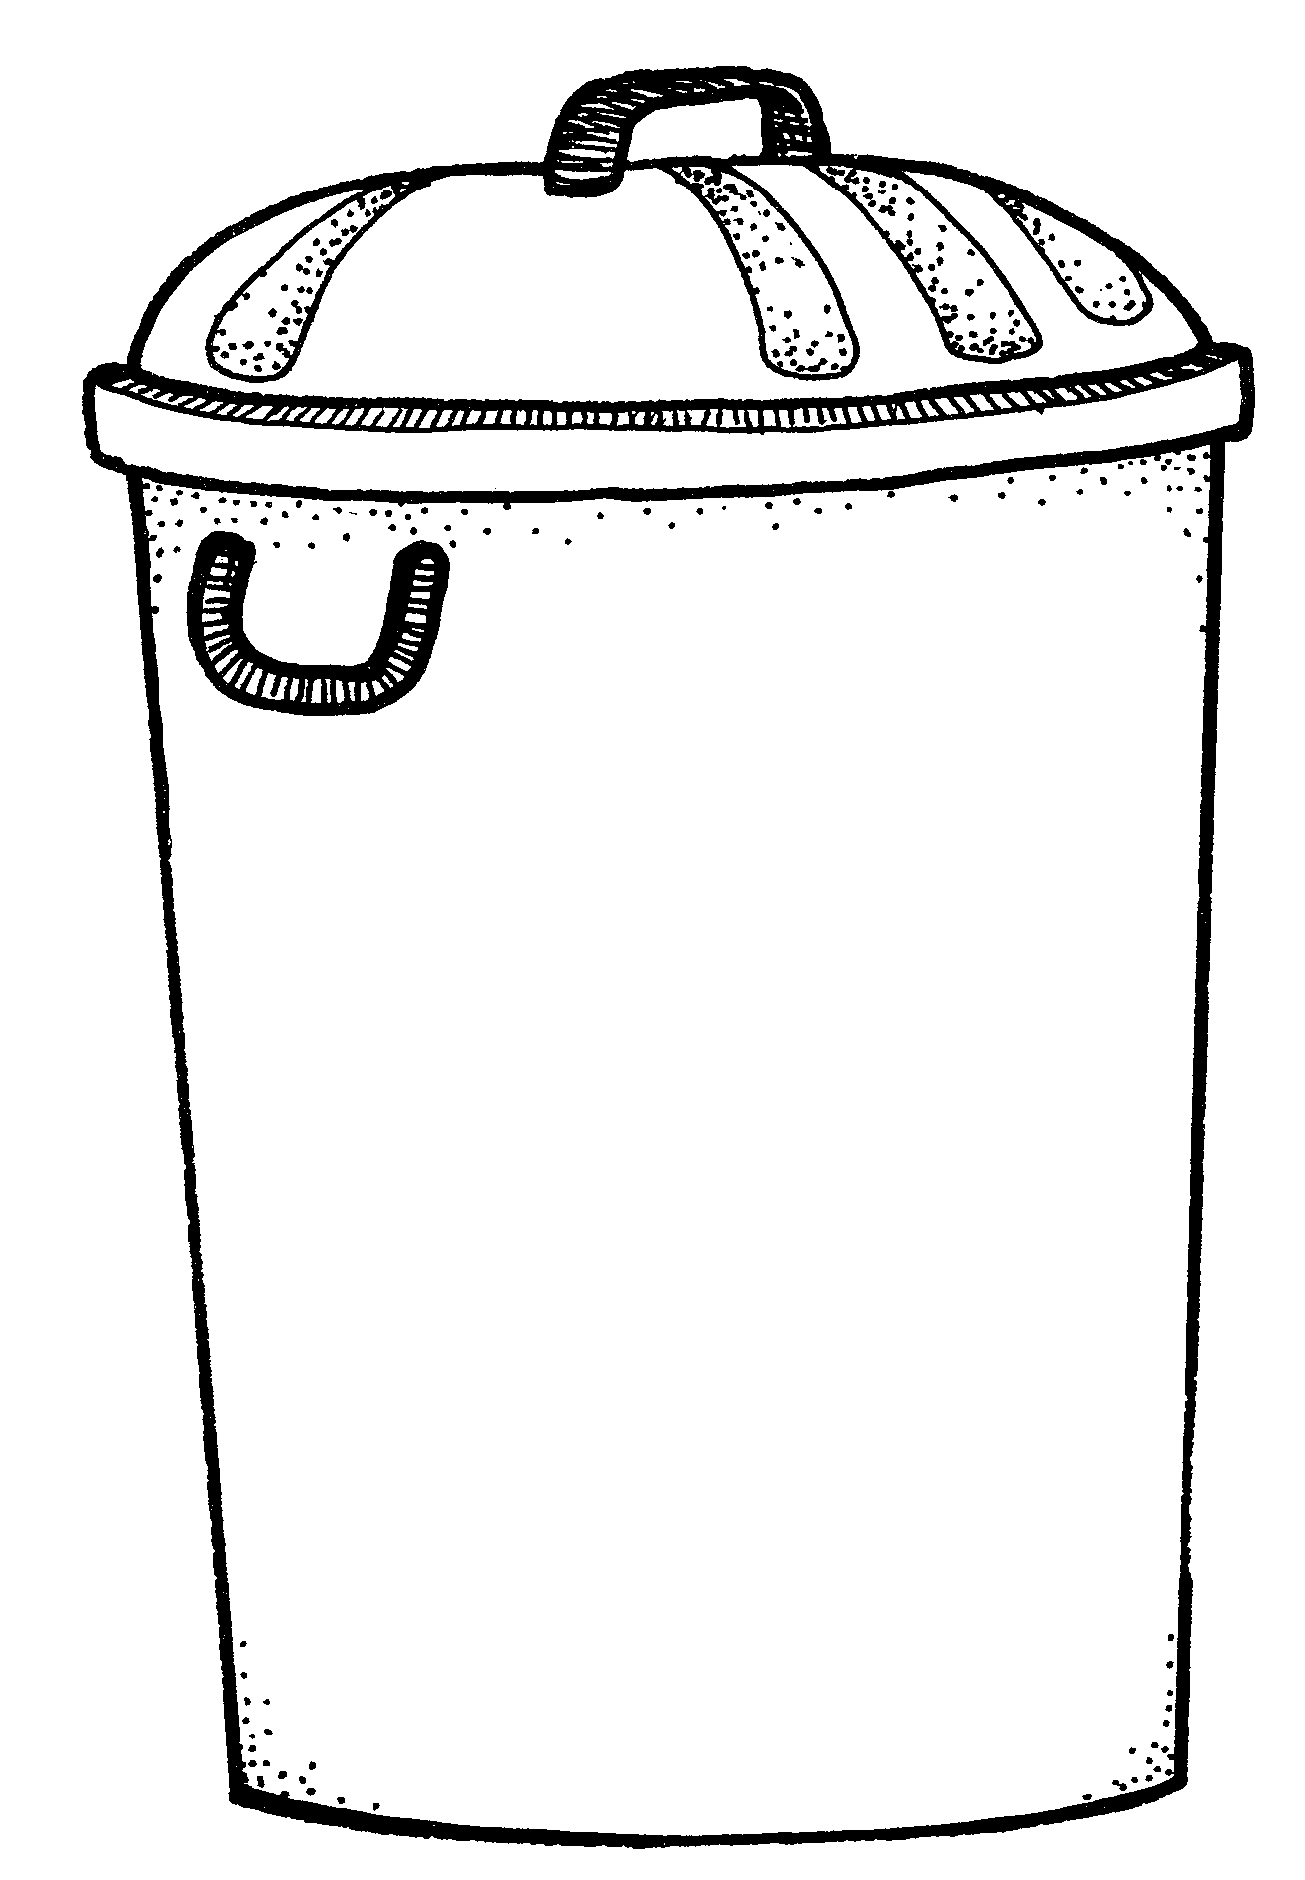 Pictures Of Trash Cans | Free Download Clip Art | Free Clip Art ...